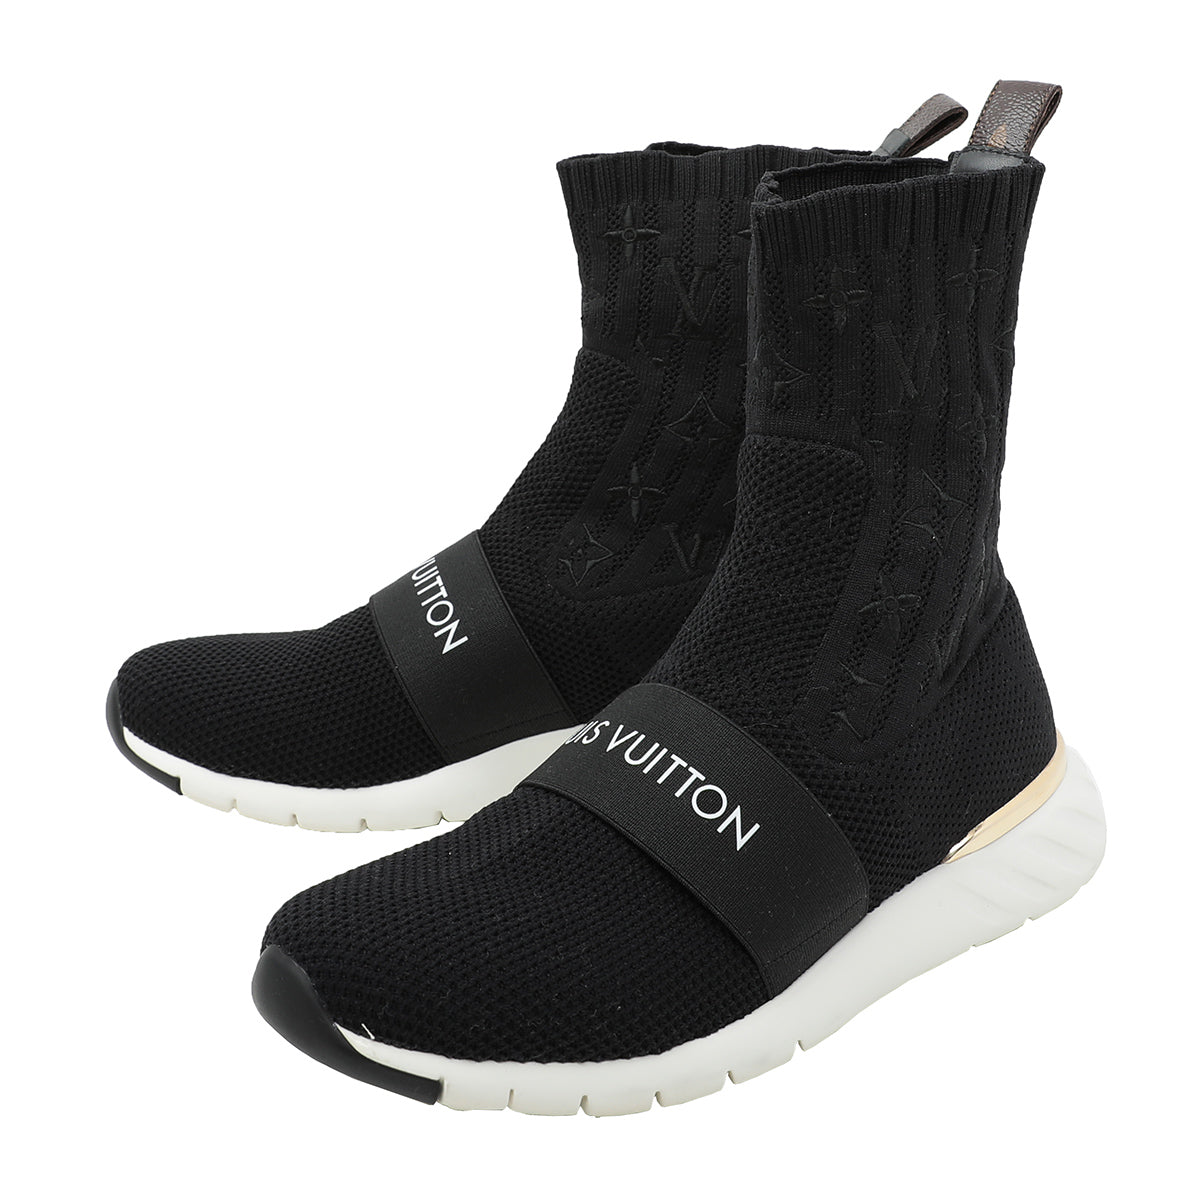 vuitton aftergame sneaker boot